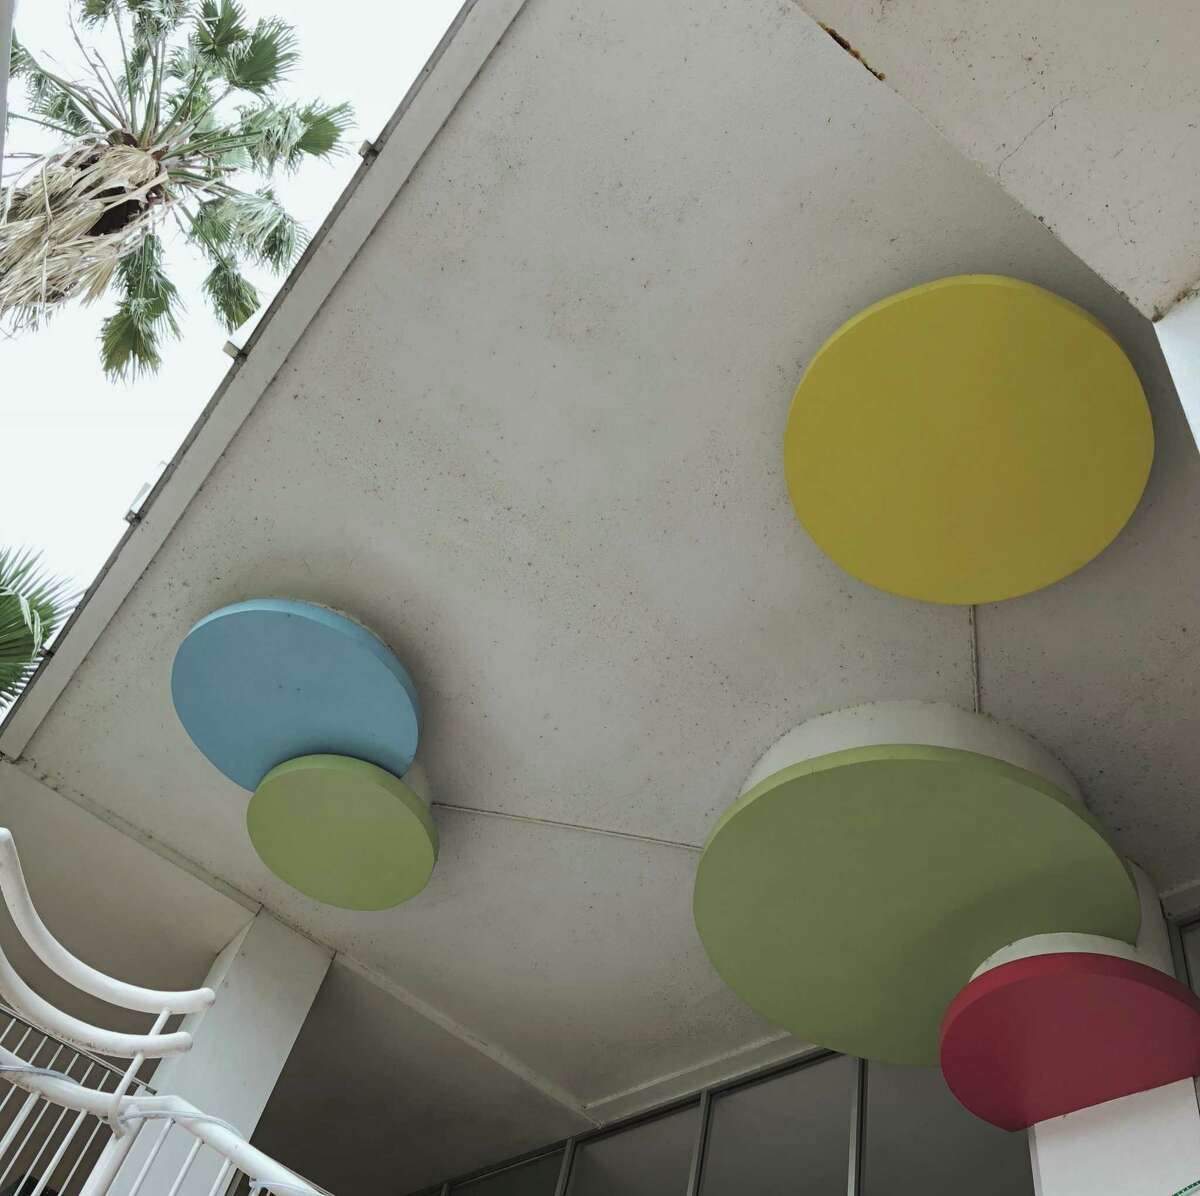 Pops of color are common design elements in mid-century modern architecture. Here’s a look at the ceiling of El Tropicano Hotel on the River Walk.